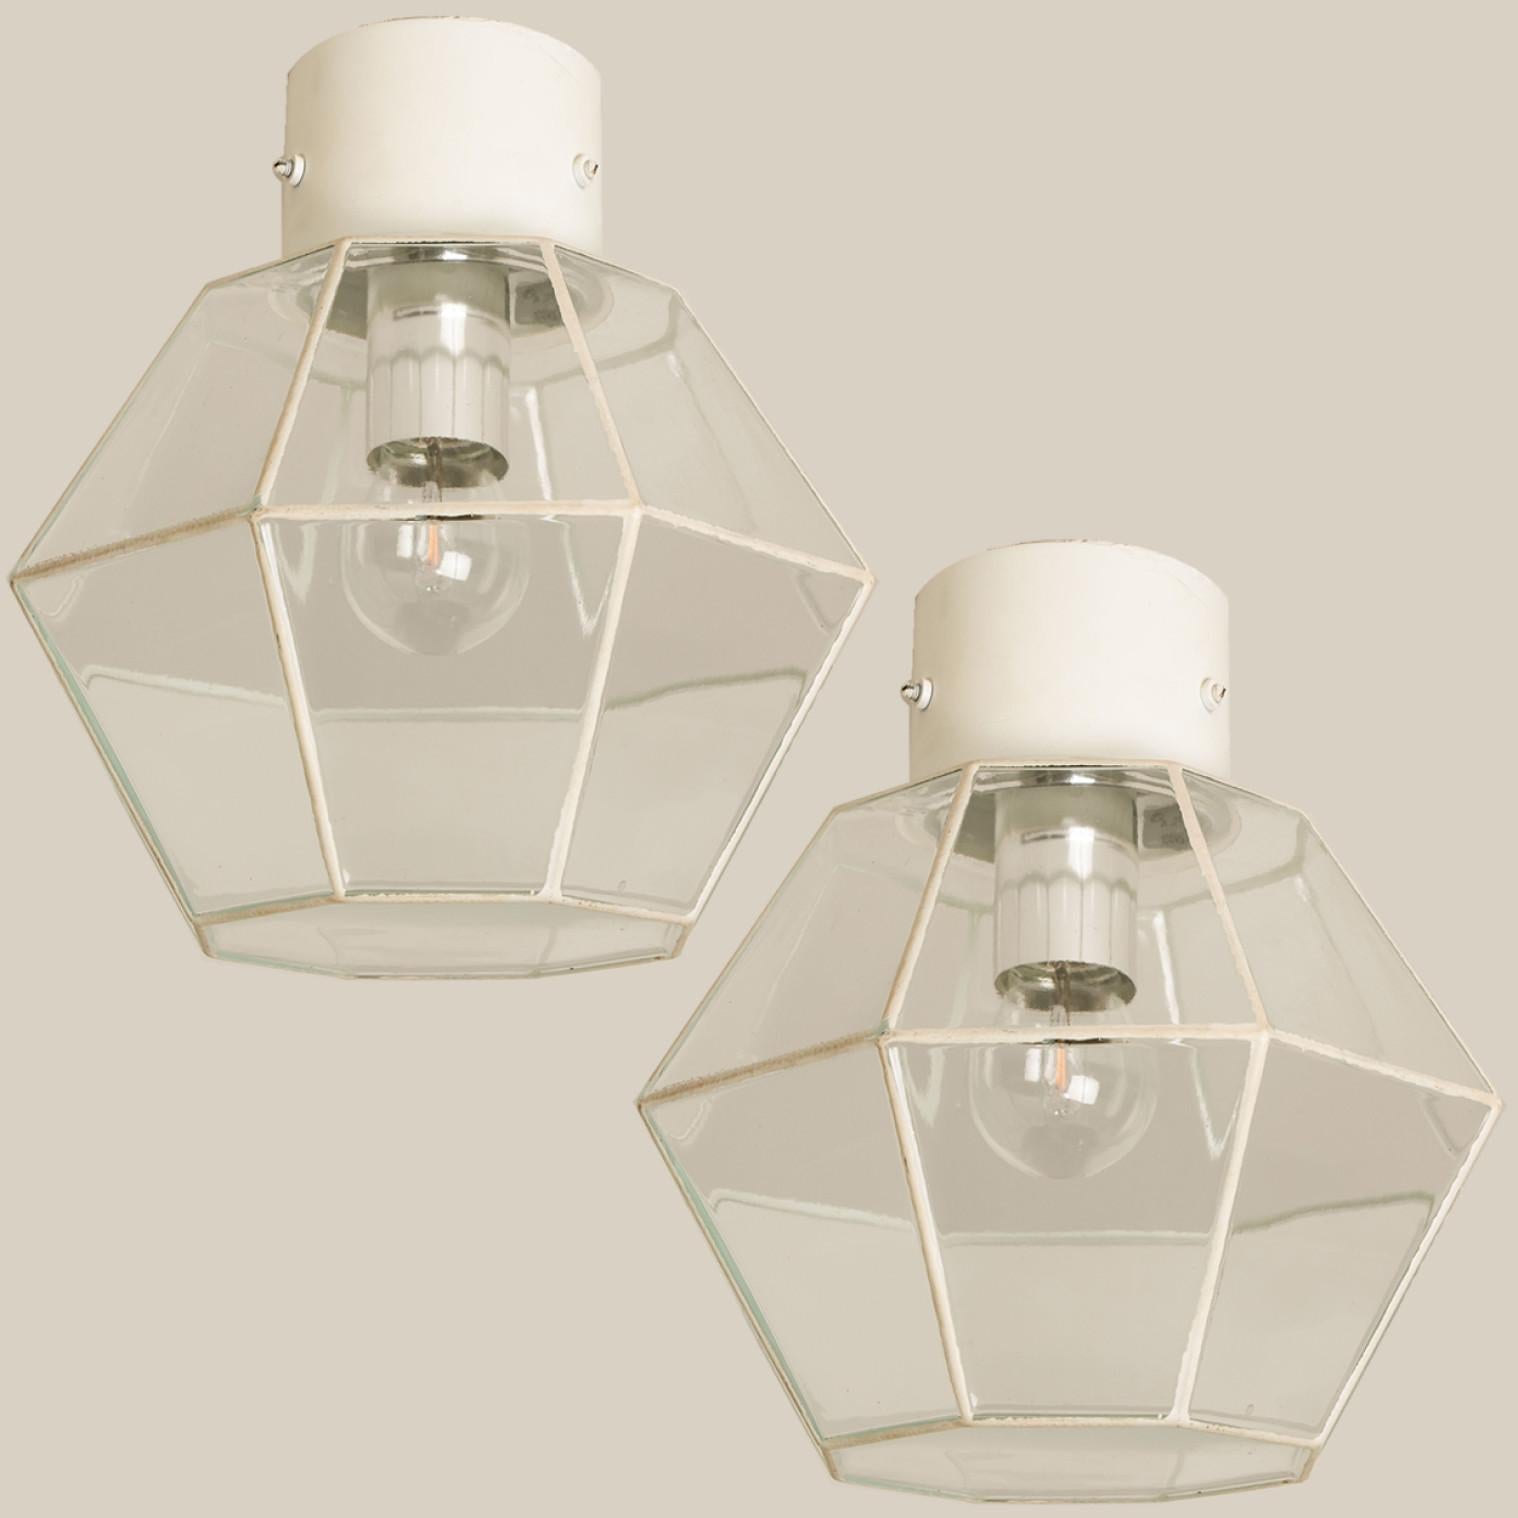 A beautiful set of octagonal glass light flush mounts or wall lights, manufactured by Glasshütte Limburg in Germany during the 1970s. Beautiful craftsmanship. Illuminates beautifully.

Please note the price is for one piece. Two pieces